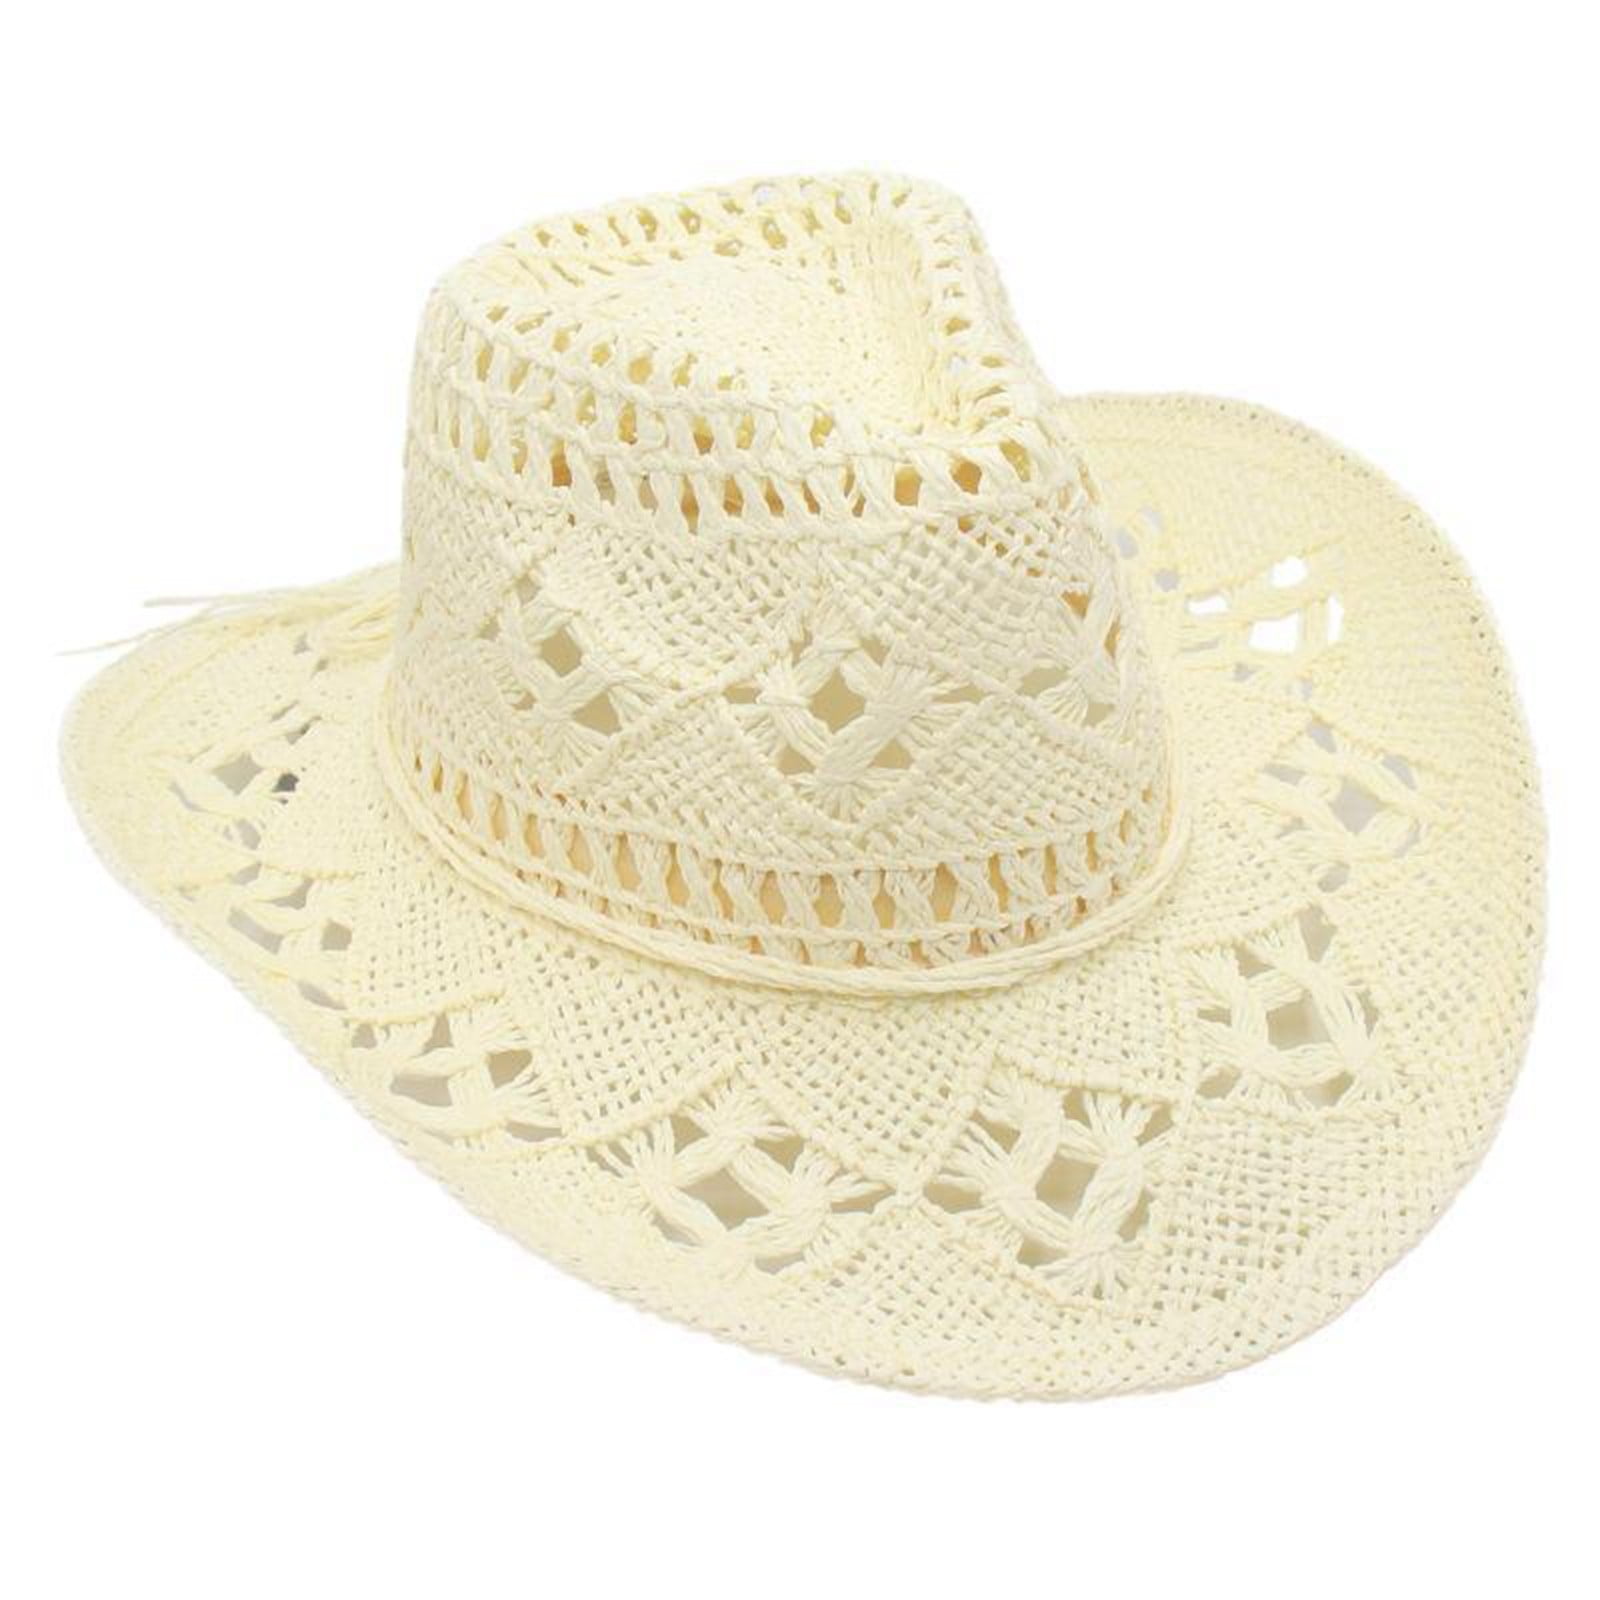 EHTMSAK Straw Cowboy Hat for Women Wide-Brimmed Western Cowboy Cowgirl  Multi-Functional Sun Hat for Summer White Free Size